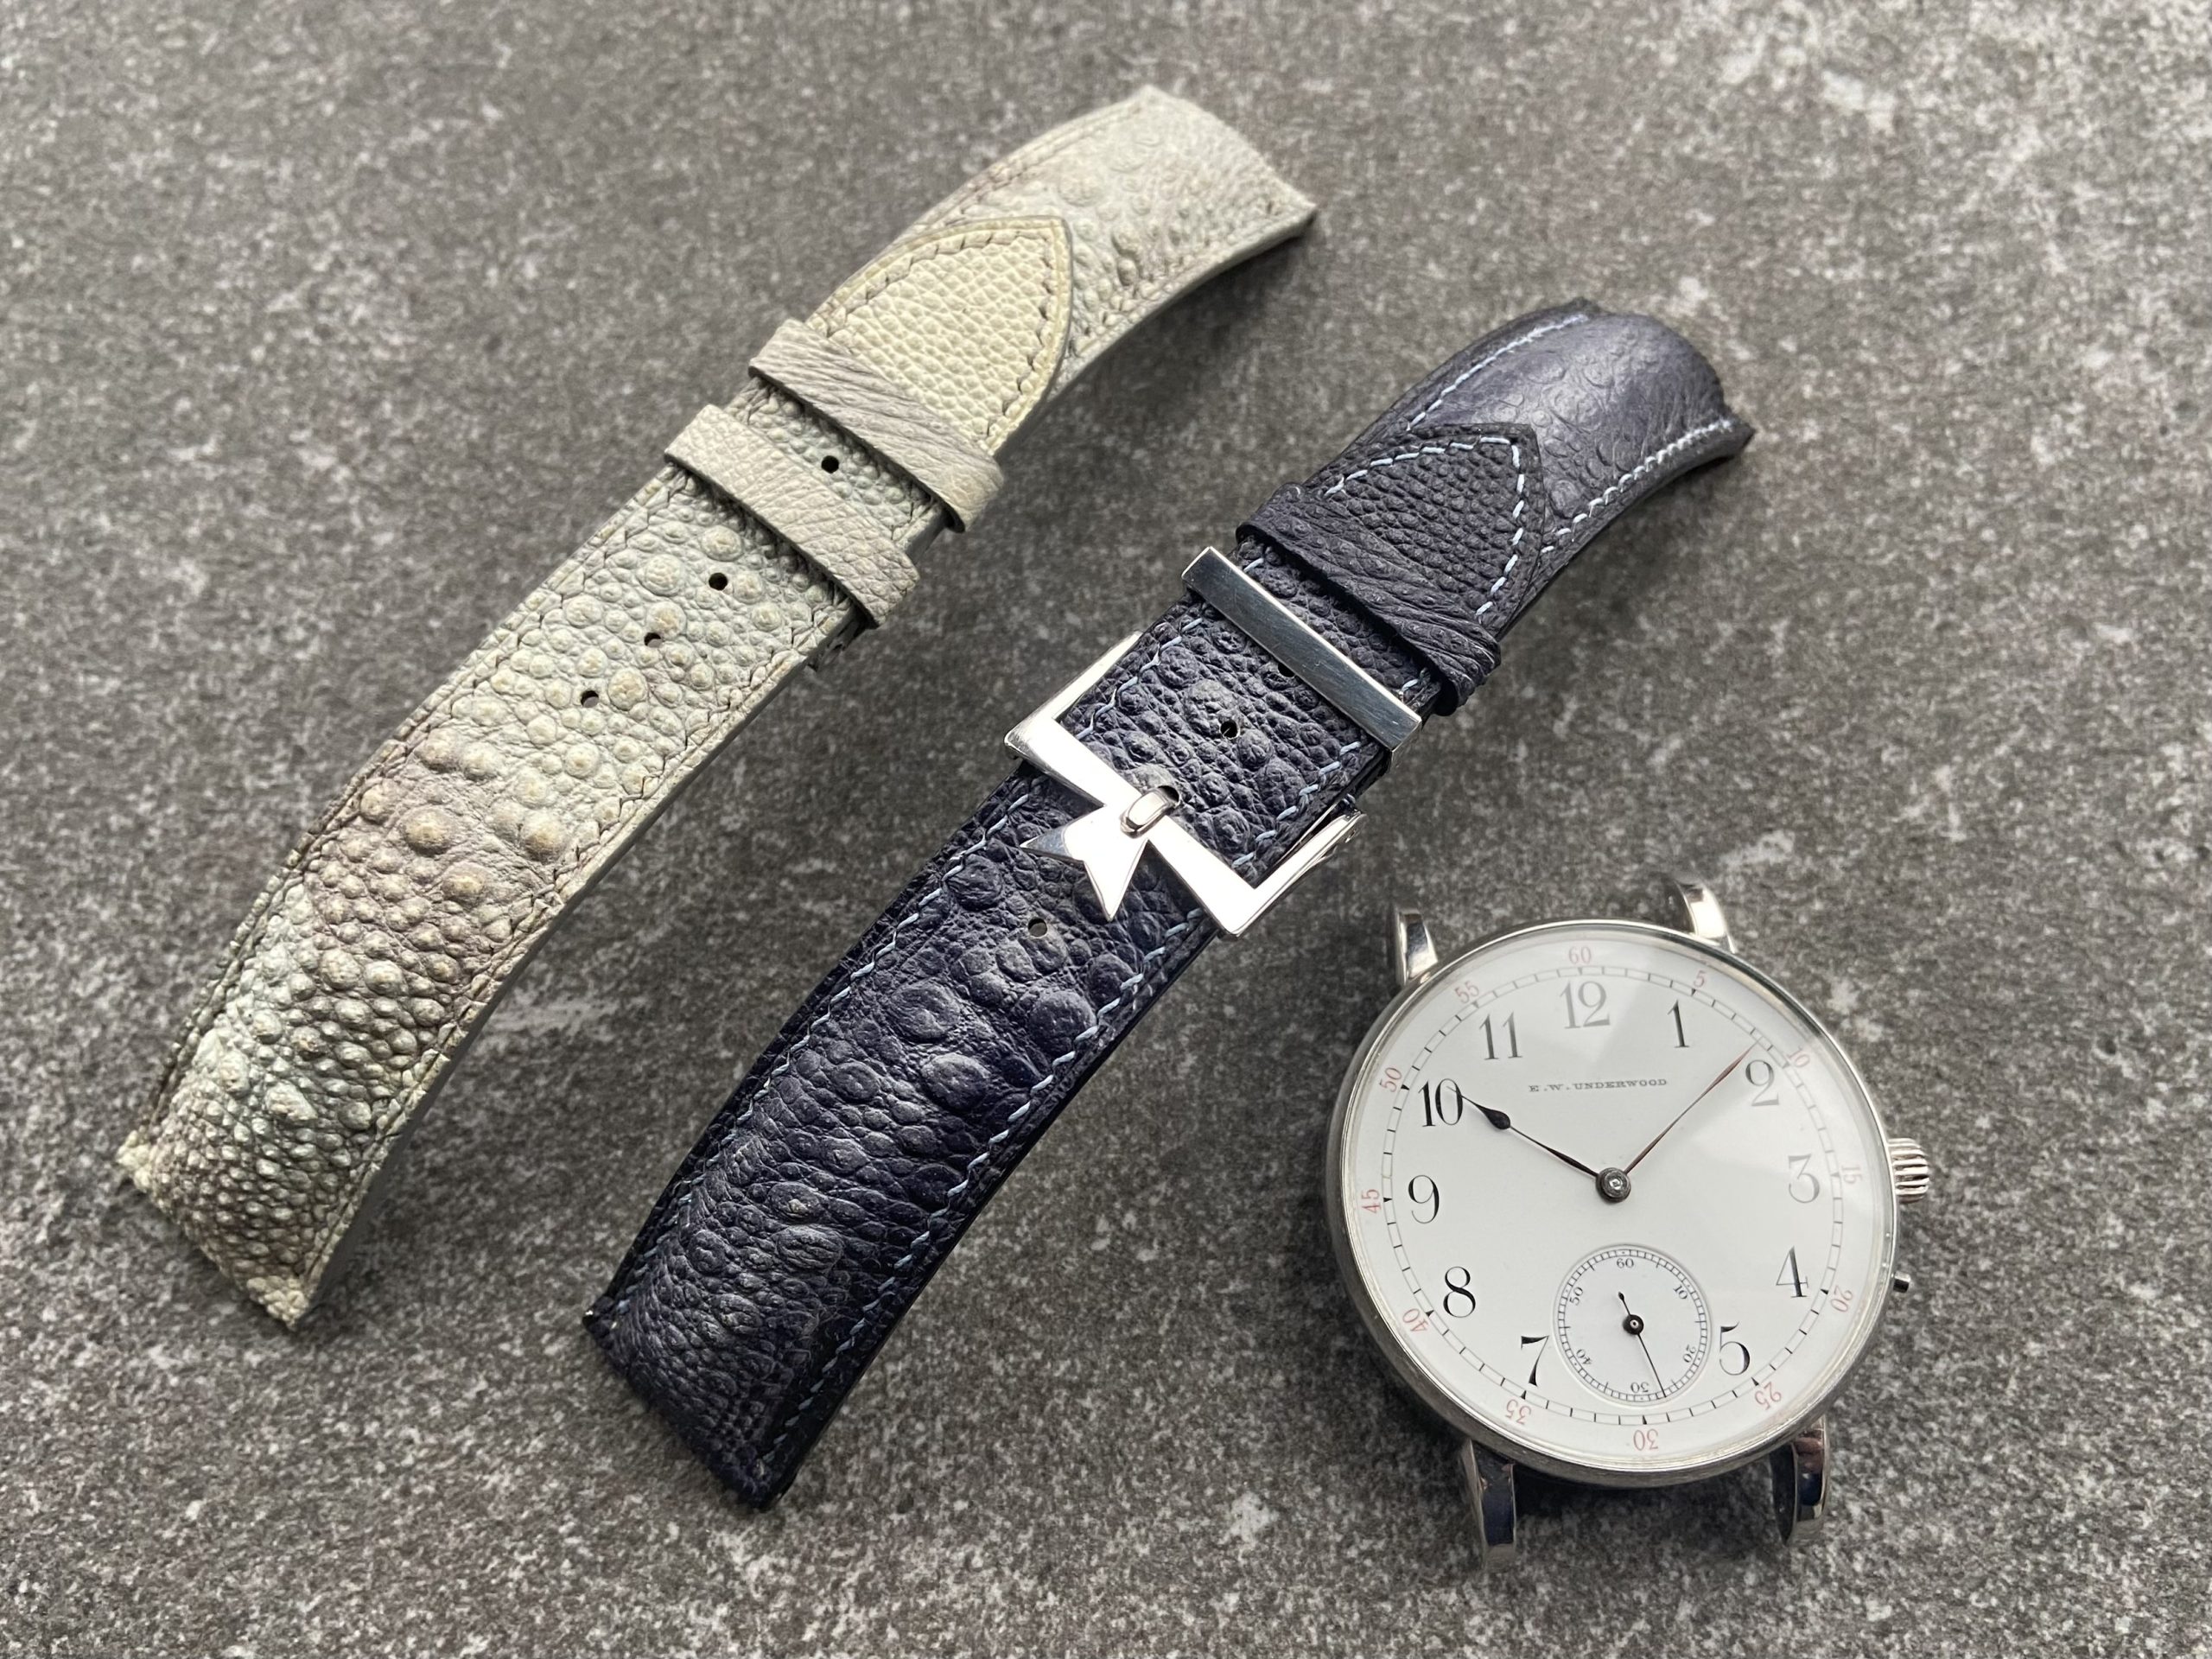 Bullfrog leather watch straps